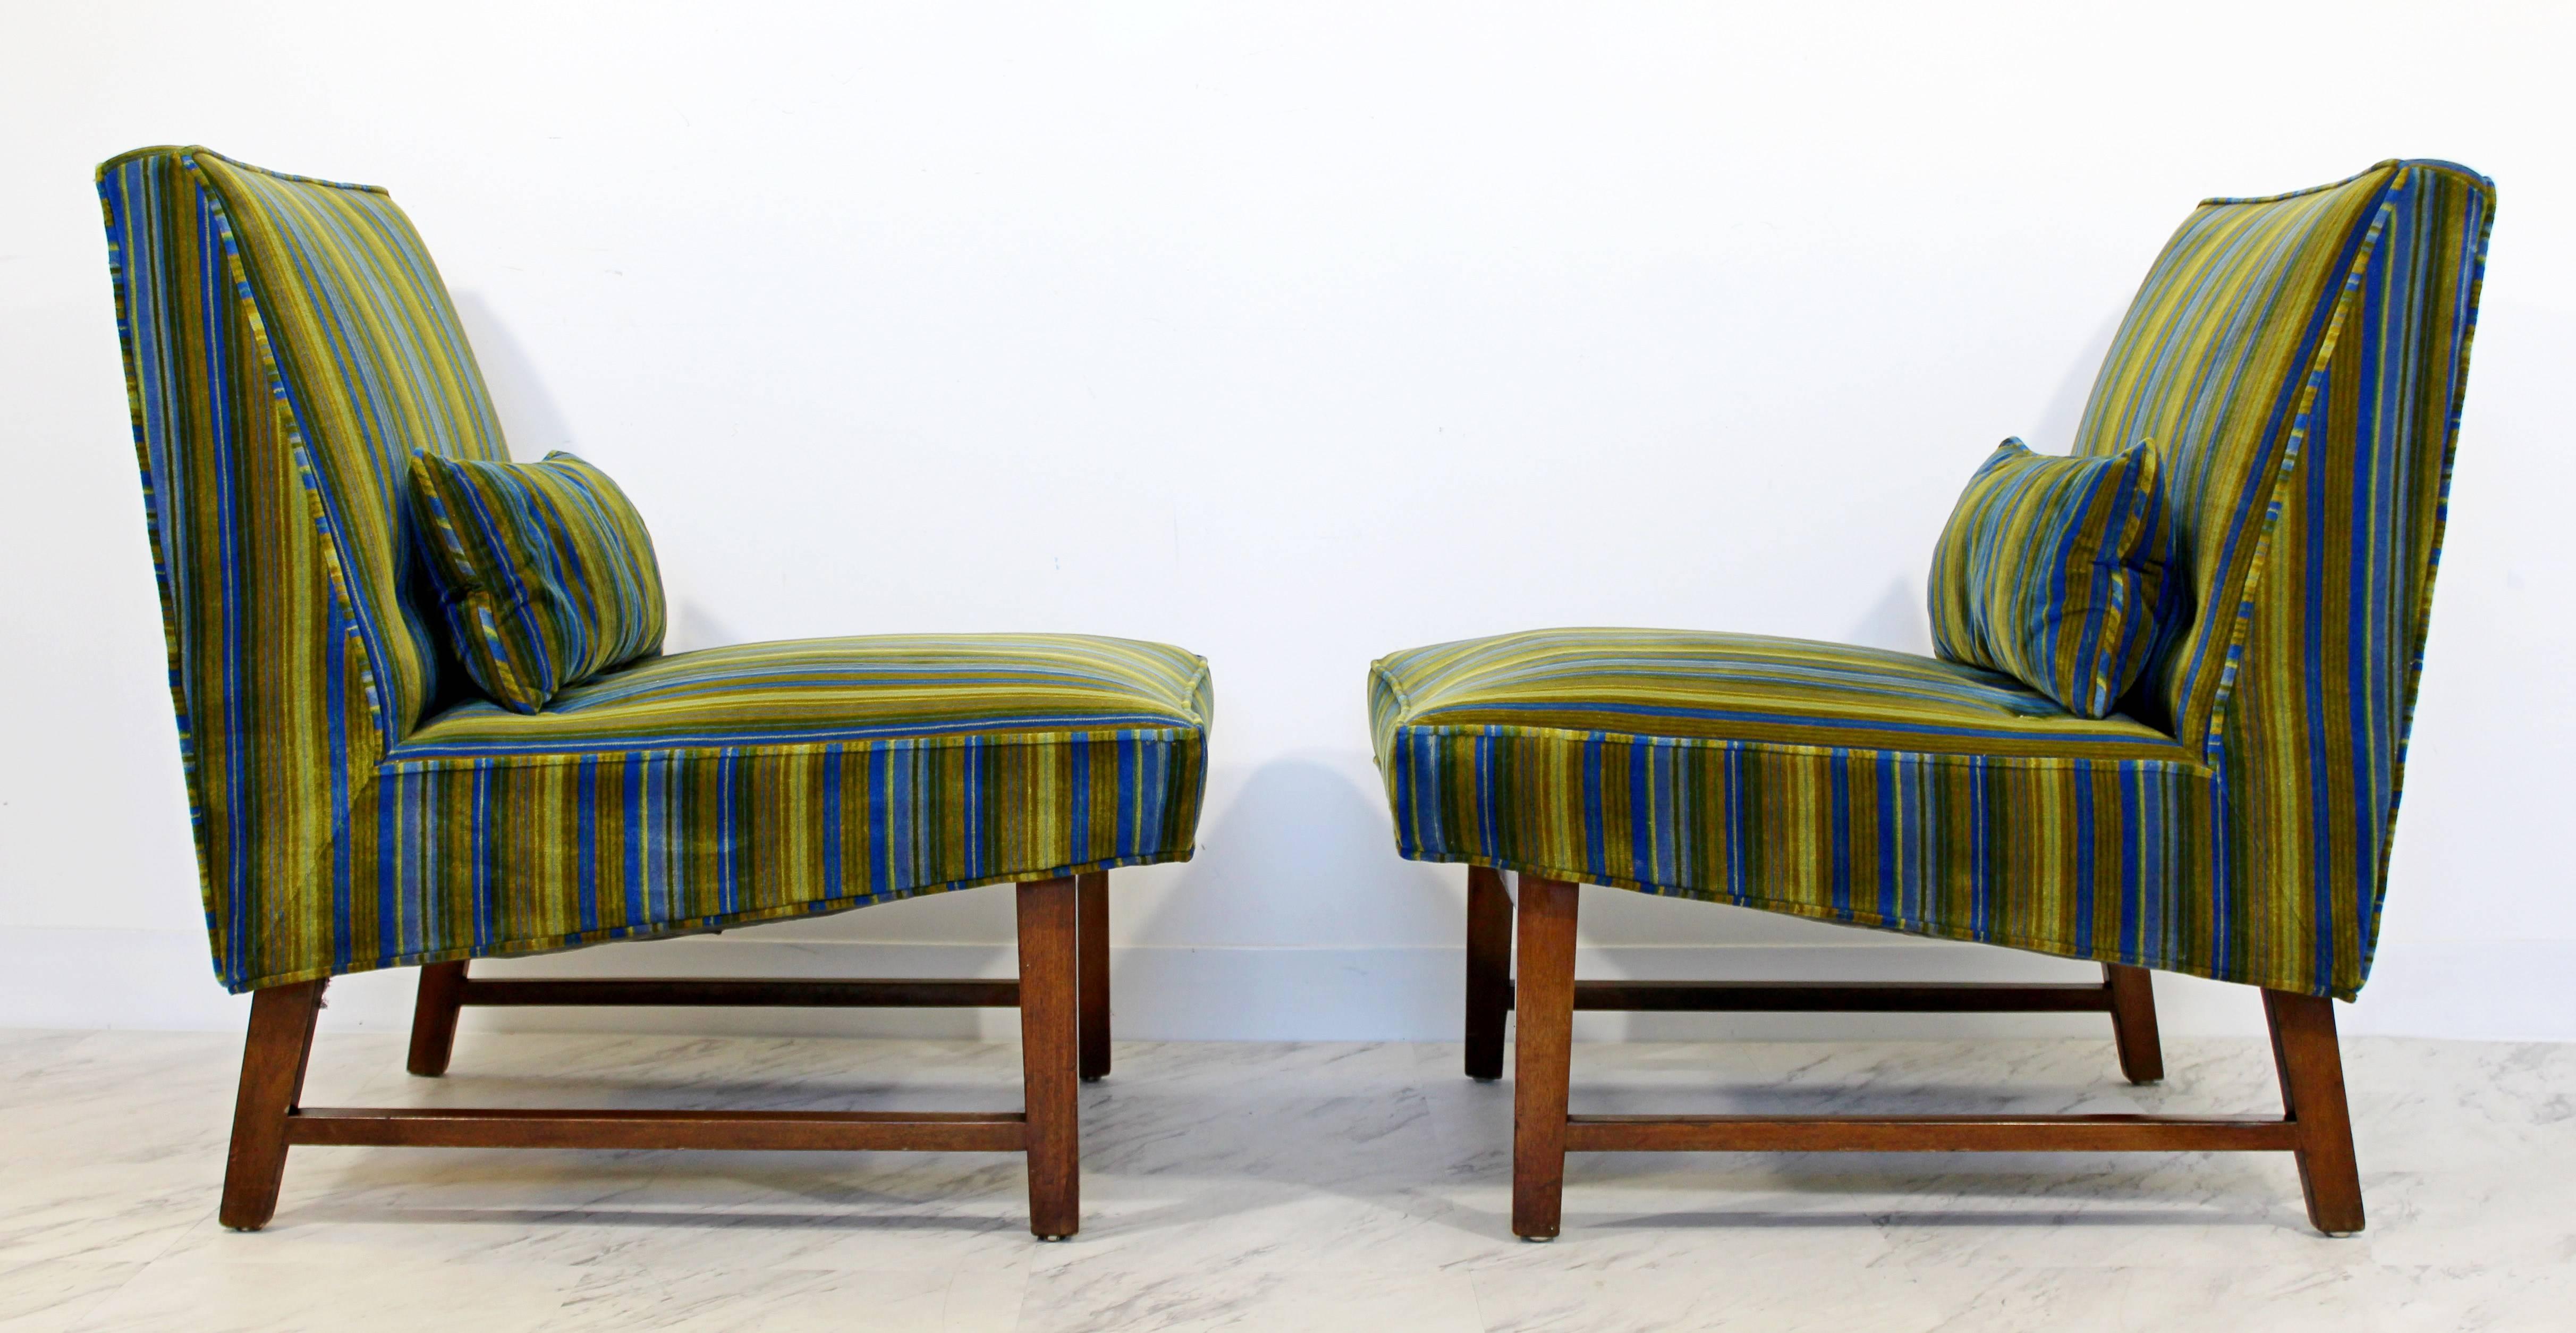 For your consideration is a magnificent pair of Edward Wormley for Dunbar Model # 127 slipper lounge chairs. The upholstery is attributed to Jack Lenor Larsen and is in mint condition. Base is made of mahogany. They had special slipcovers over the